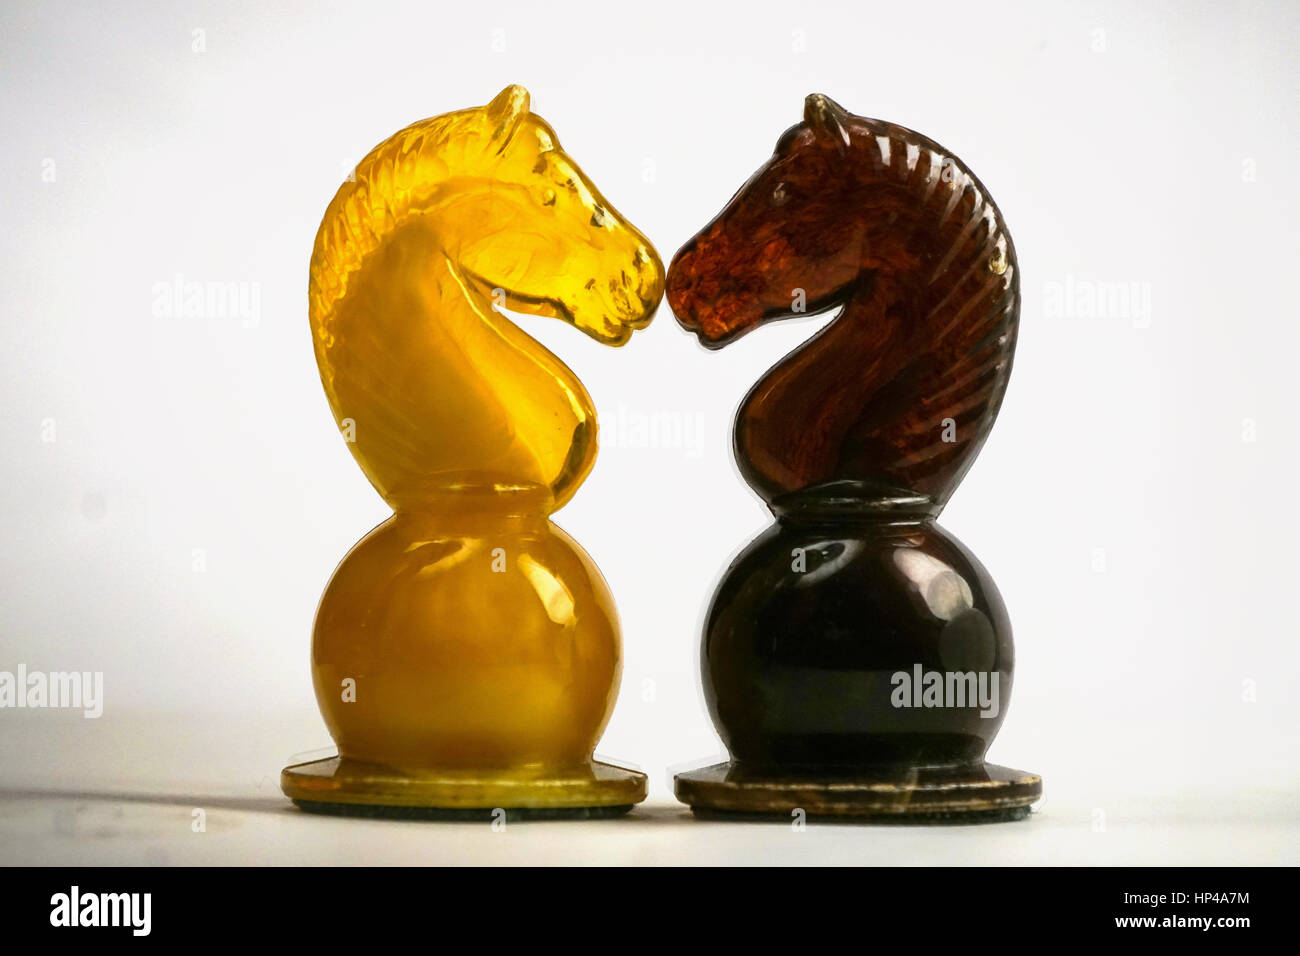 Horse knight chess pieces facing and confronting each other Stock Photo